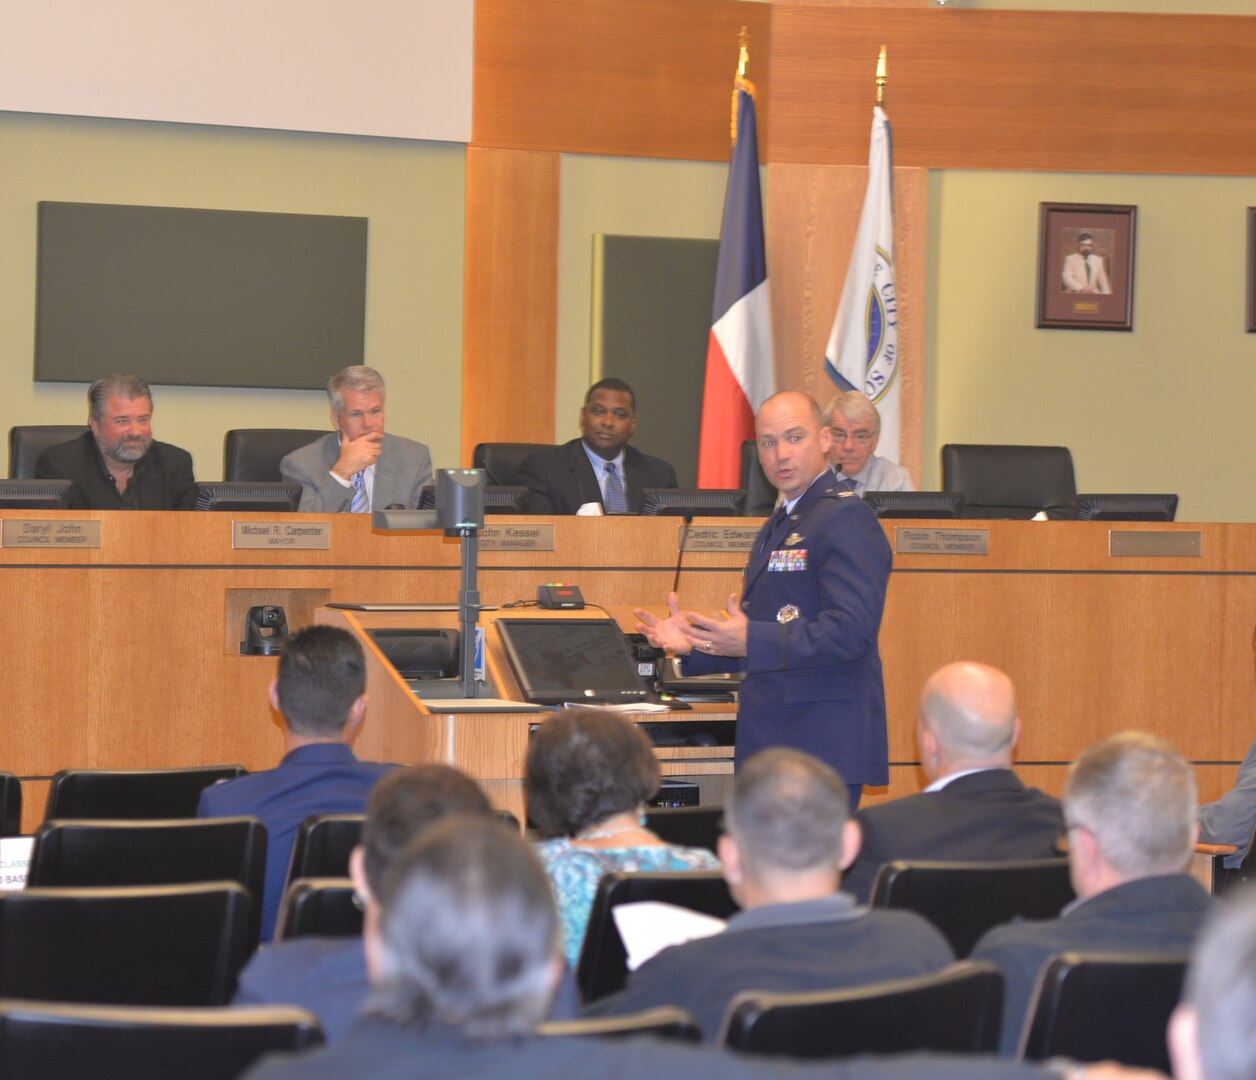 Col. David Drichta, 12th Operations Group commander, thanks the city of Schertz for the community’s support of formal adoption of the Joint Land Use Study during a city council meeting in Schertz, Texas, Nov. 17, 2015.  The study, a joint effort between the military and surrounding community partners focused on finding solutions in mutual areas of concern, such as incompatible development around airfields, was adopted by a 5-0 vote. (U.S. Air Force photo/Randy Martin)